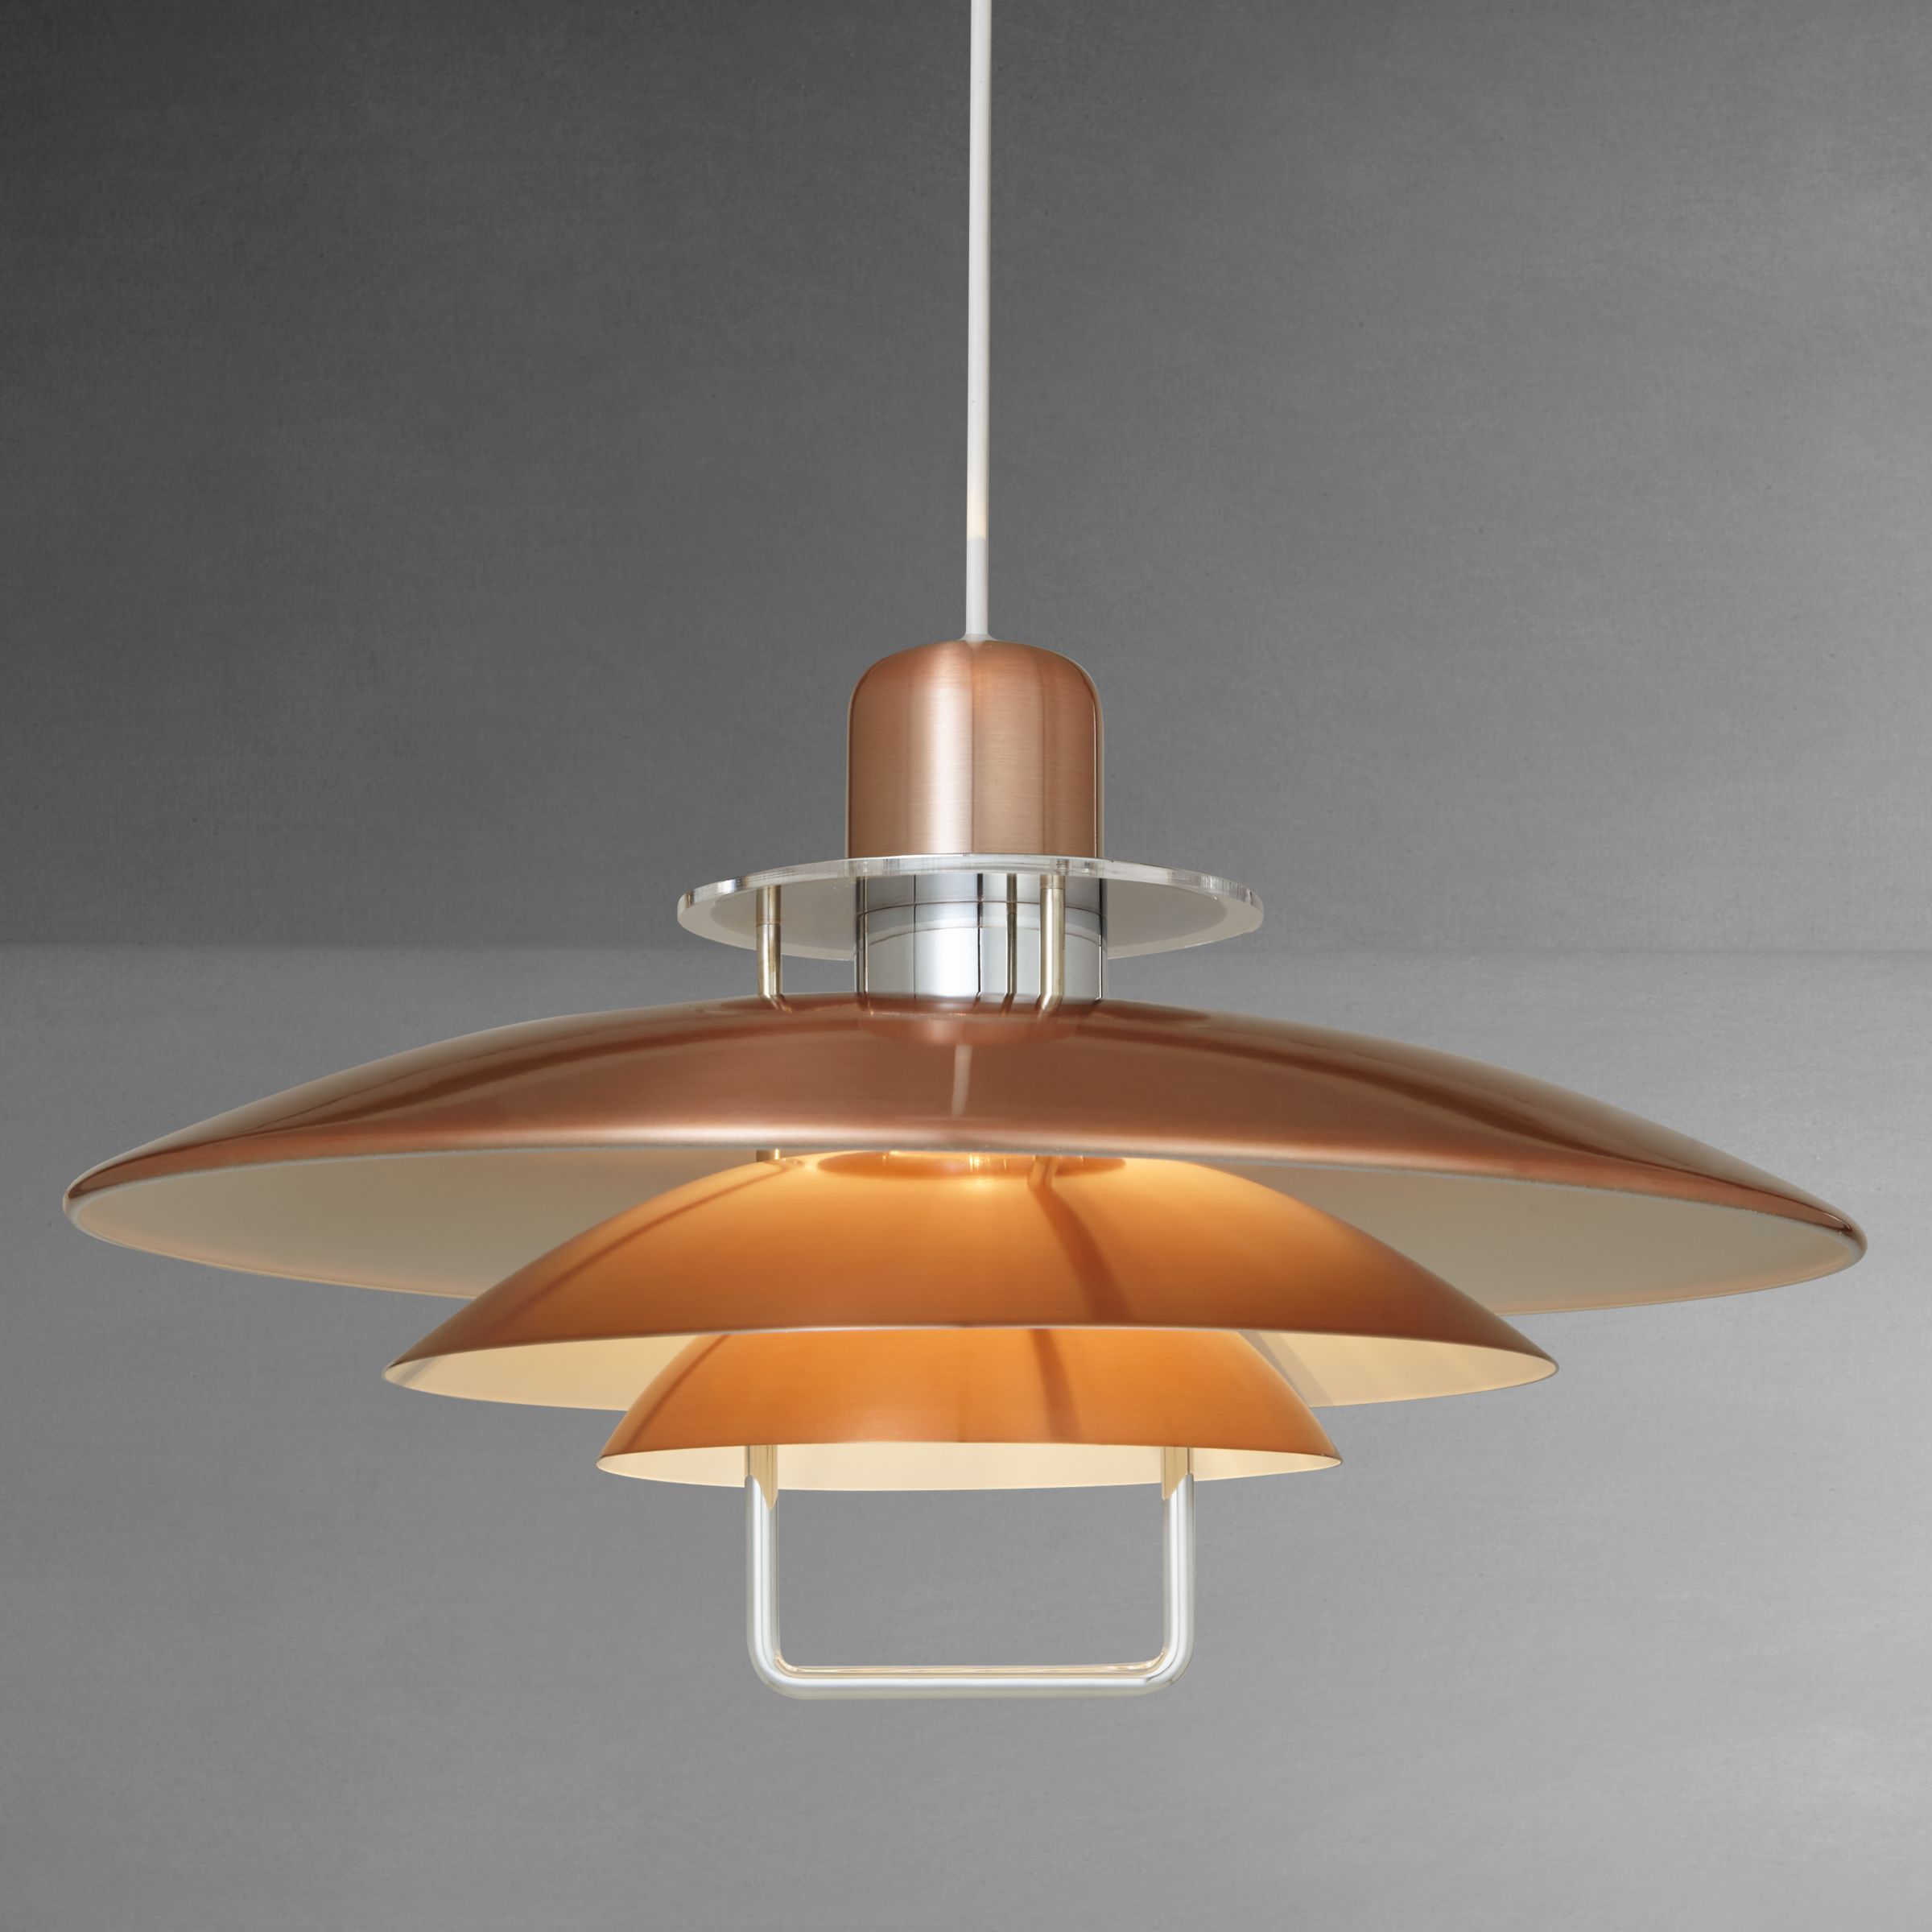 Felix rise and fall ceiling light